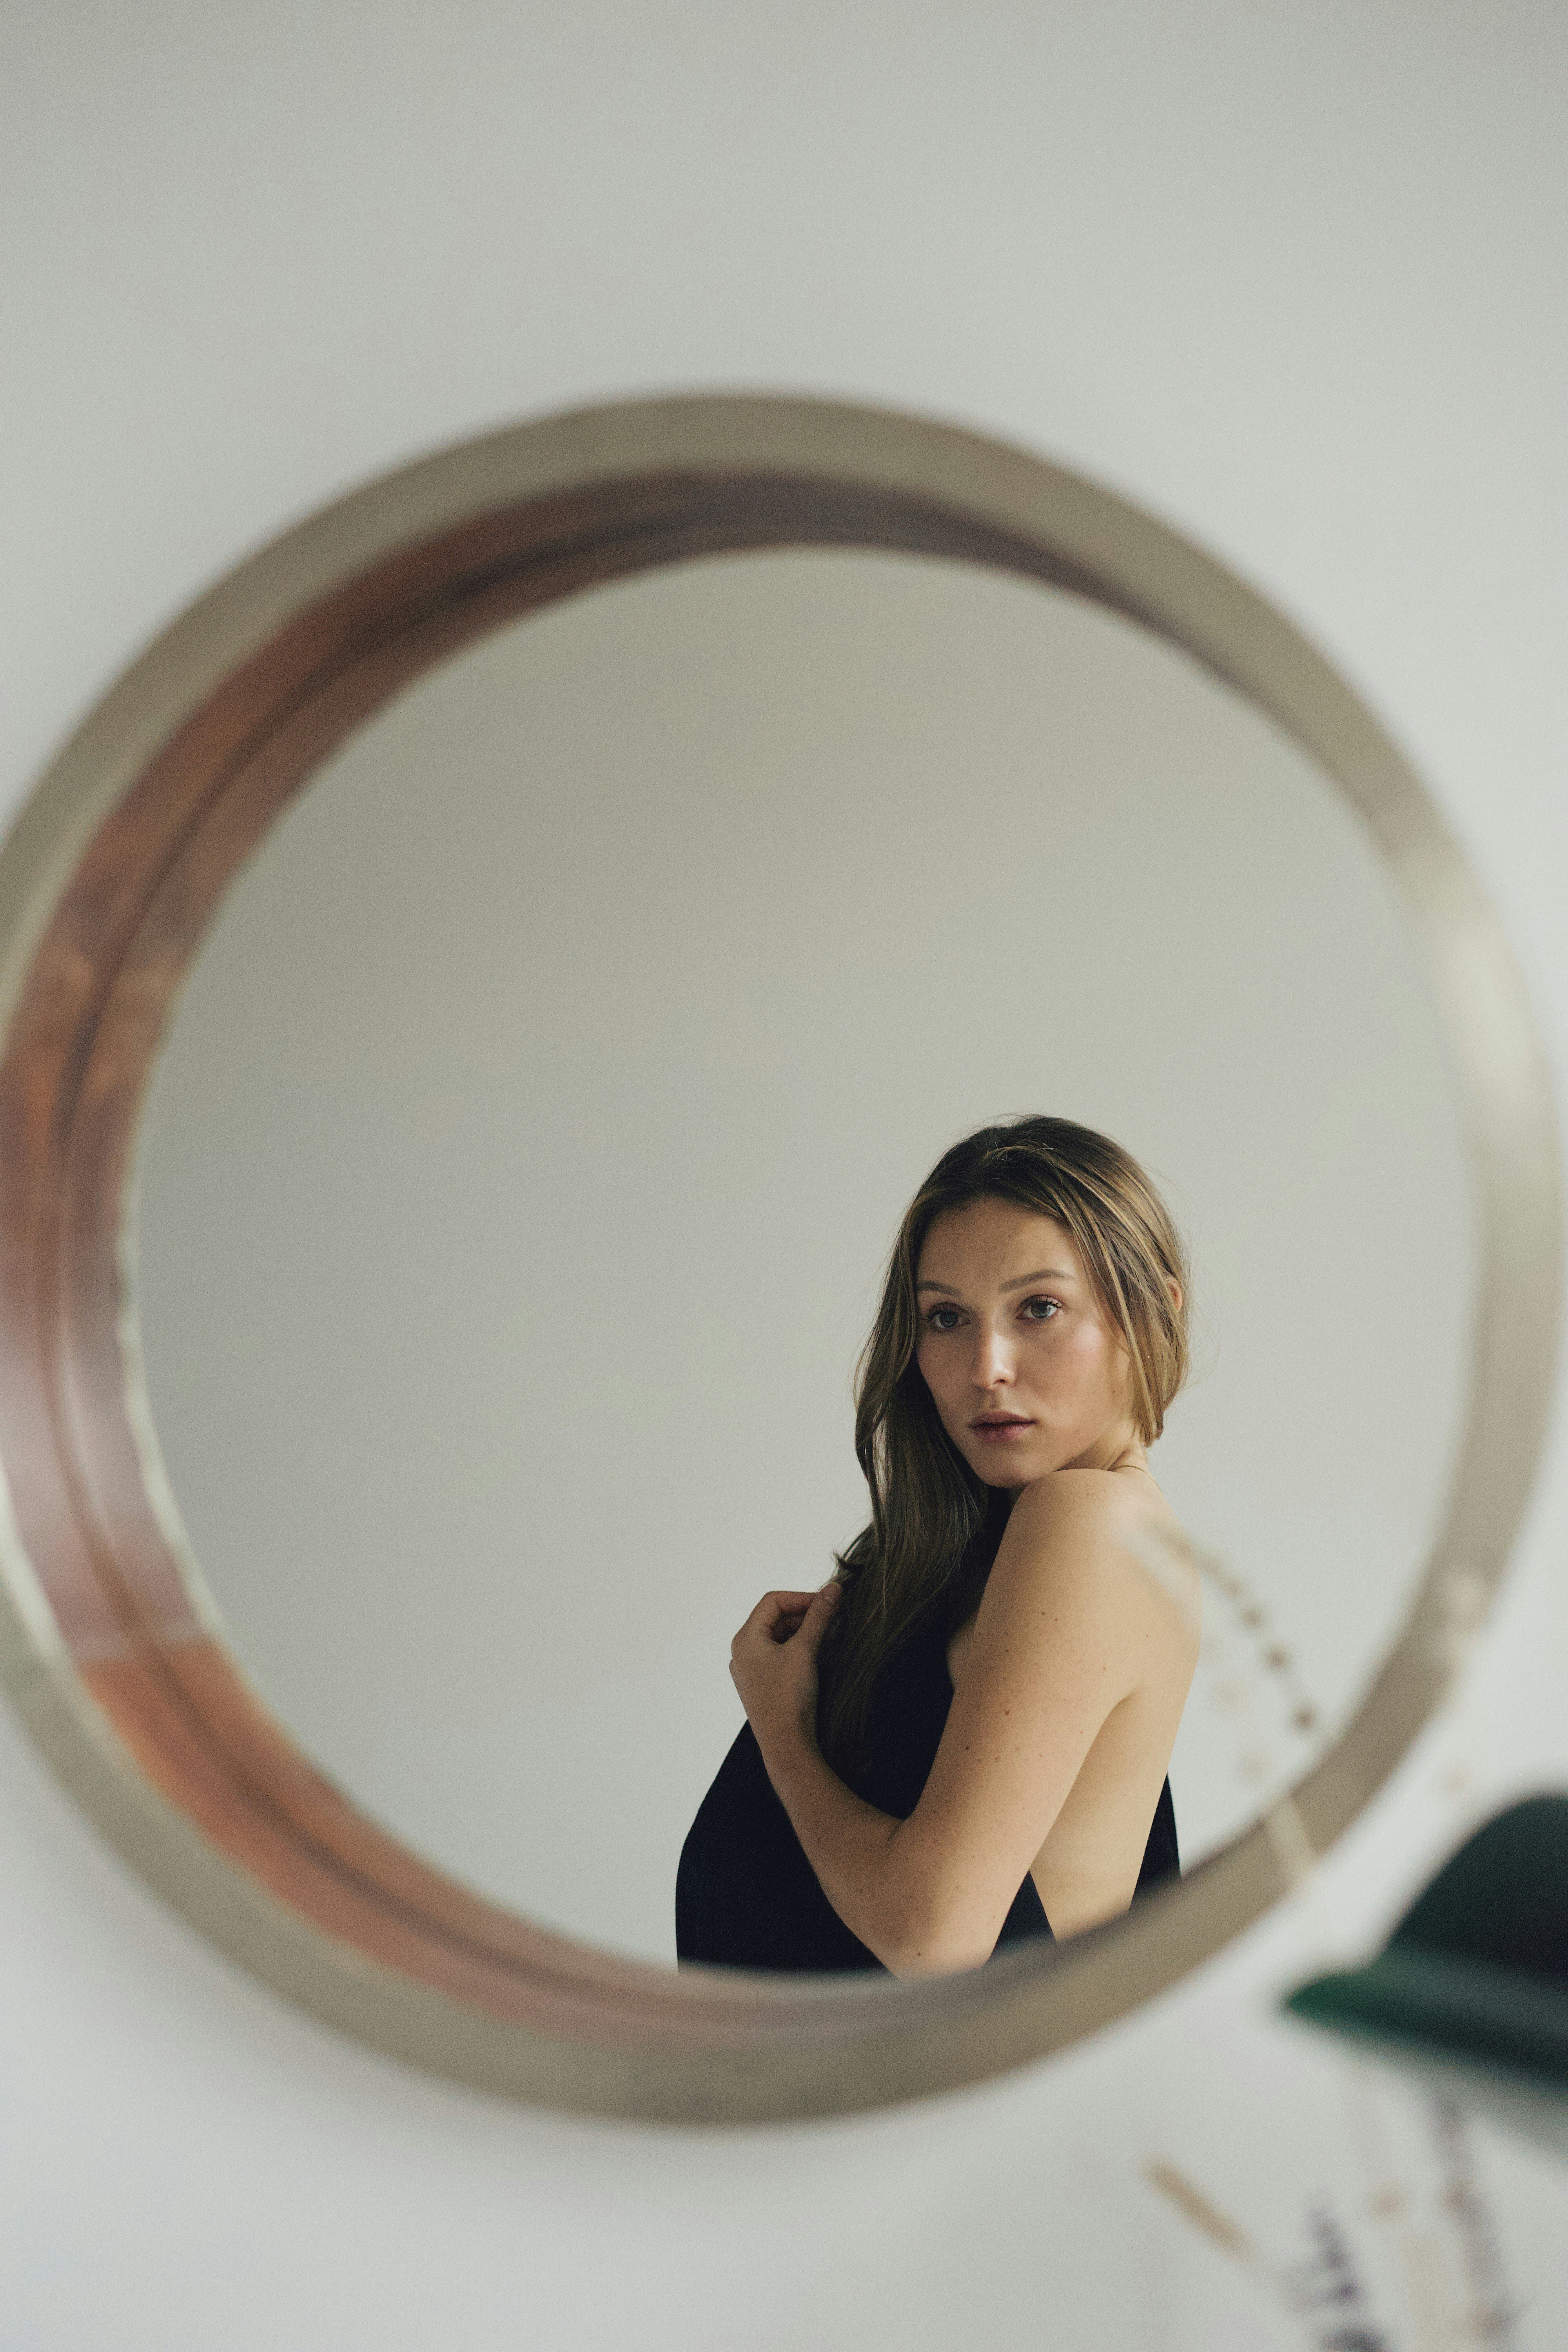 great photo recipe,how to photograph woman in black sleeveless dress sitting on round mirror